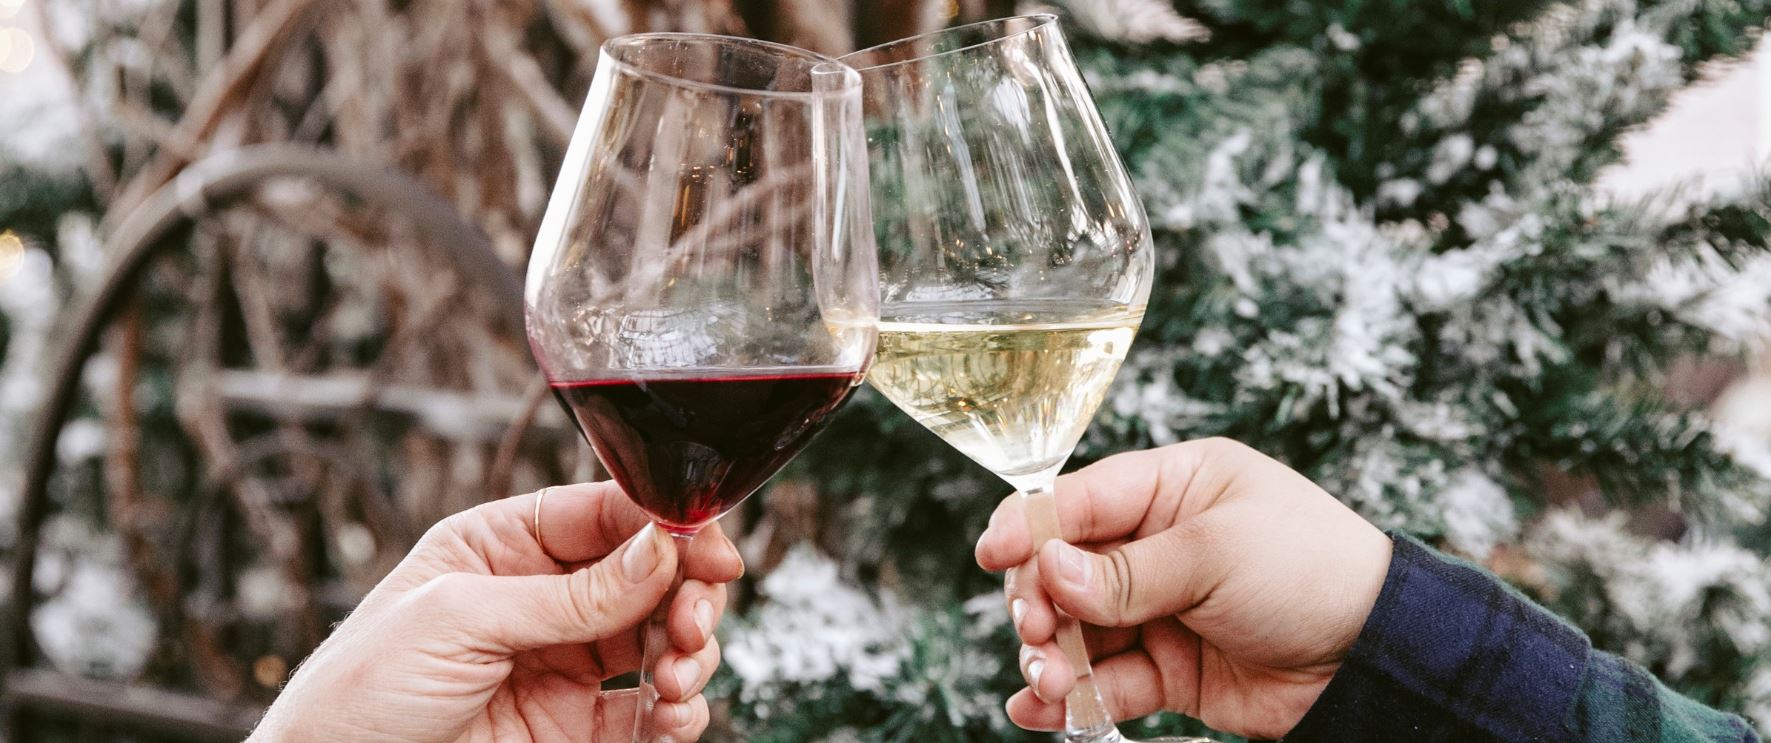 5 Tips for Choosing the Best Wines for Your Christmas Meal